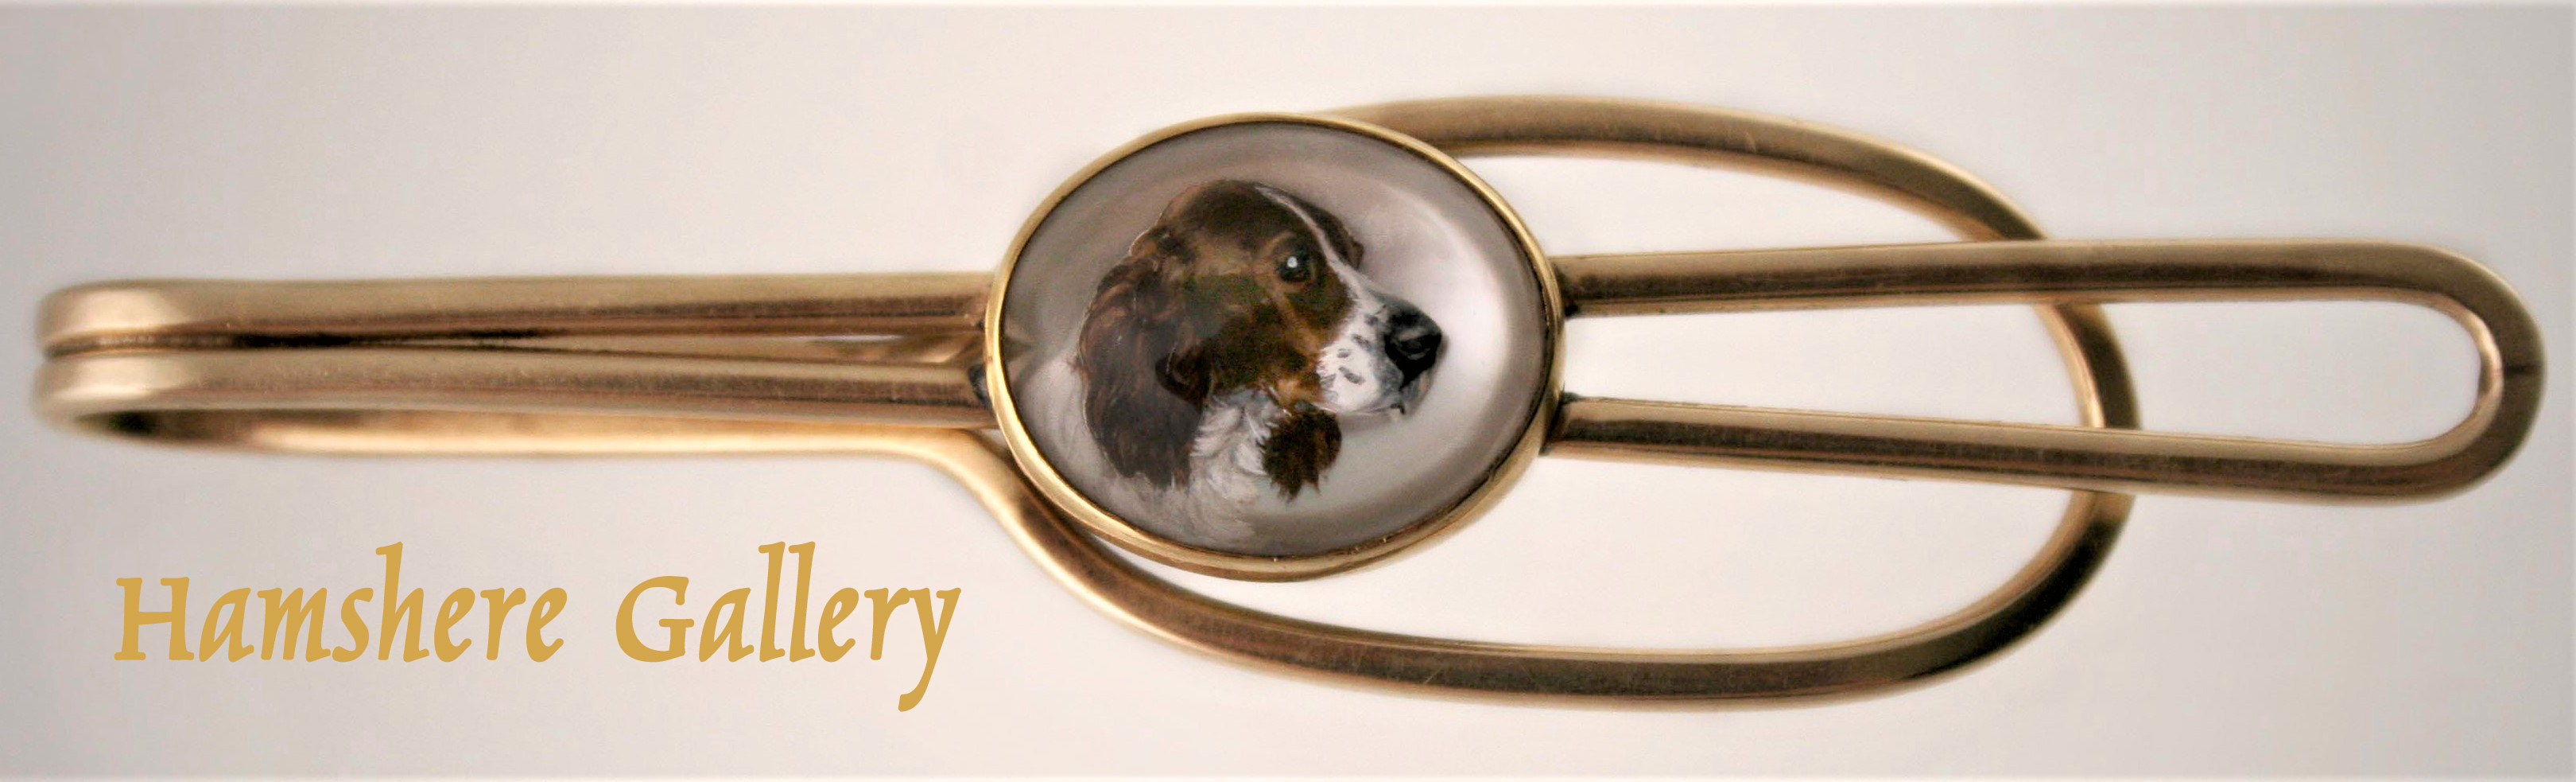 Click to see full size: merican, 14 carat gold money clip / tie clip set with Springer Spaniel reverse intaglio crystal 